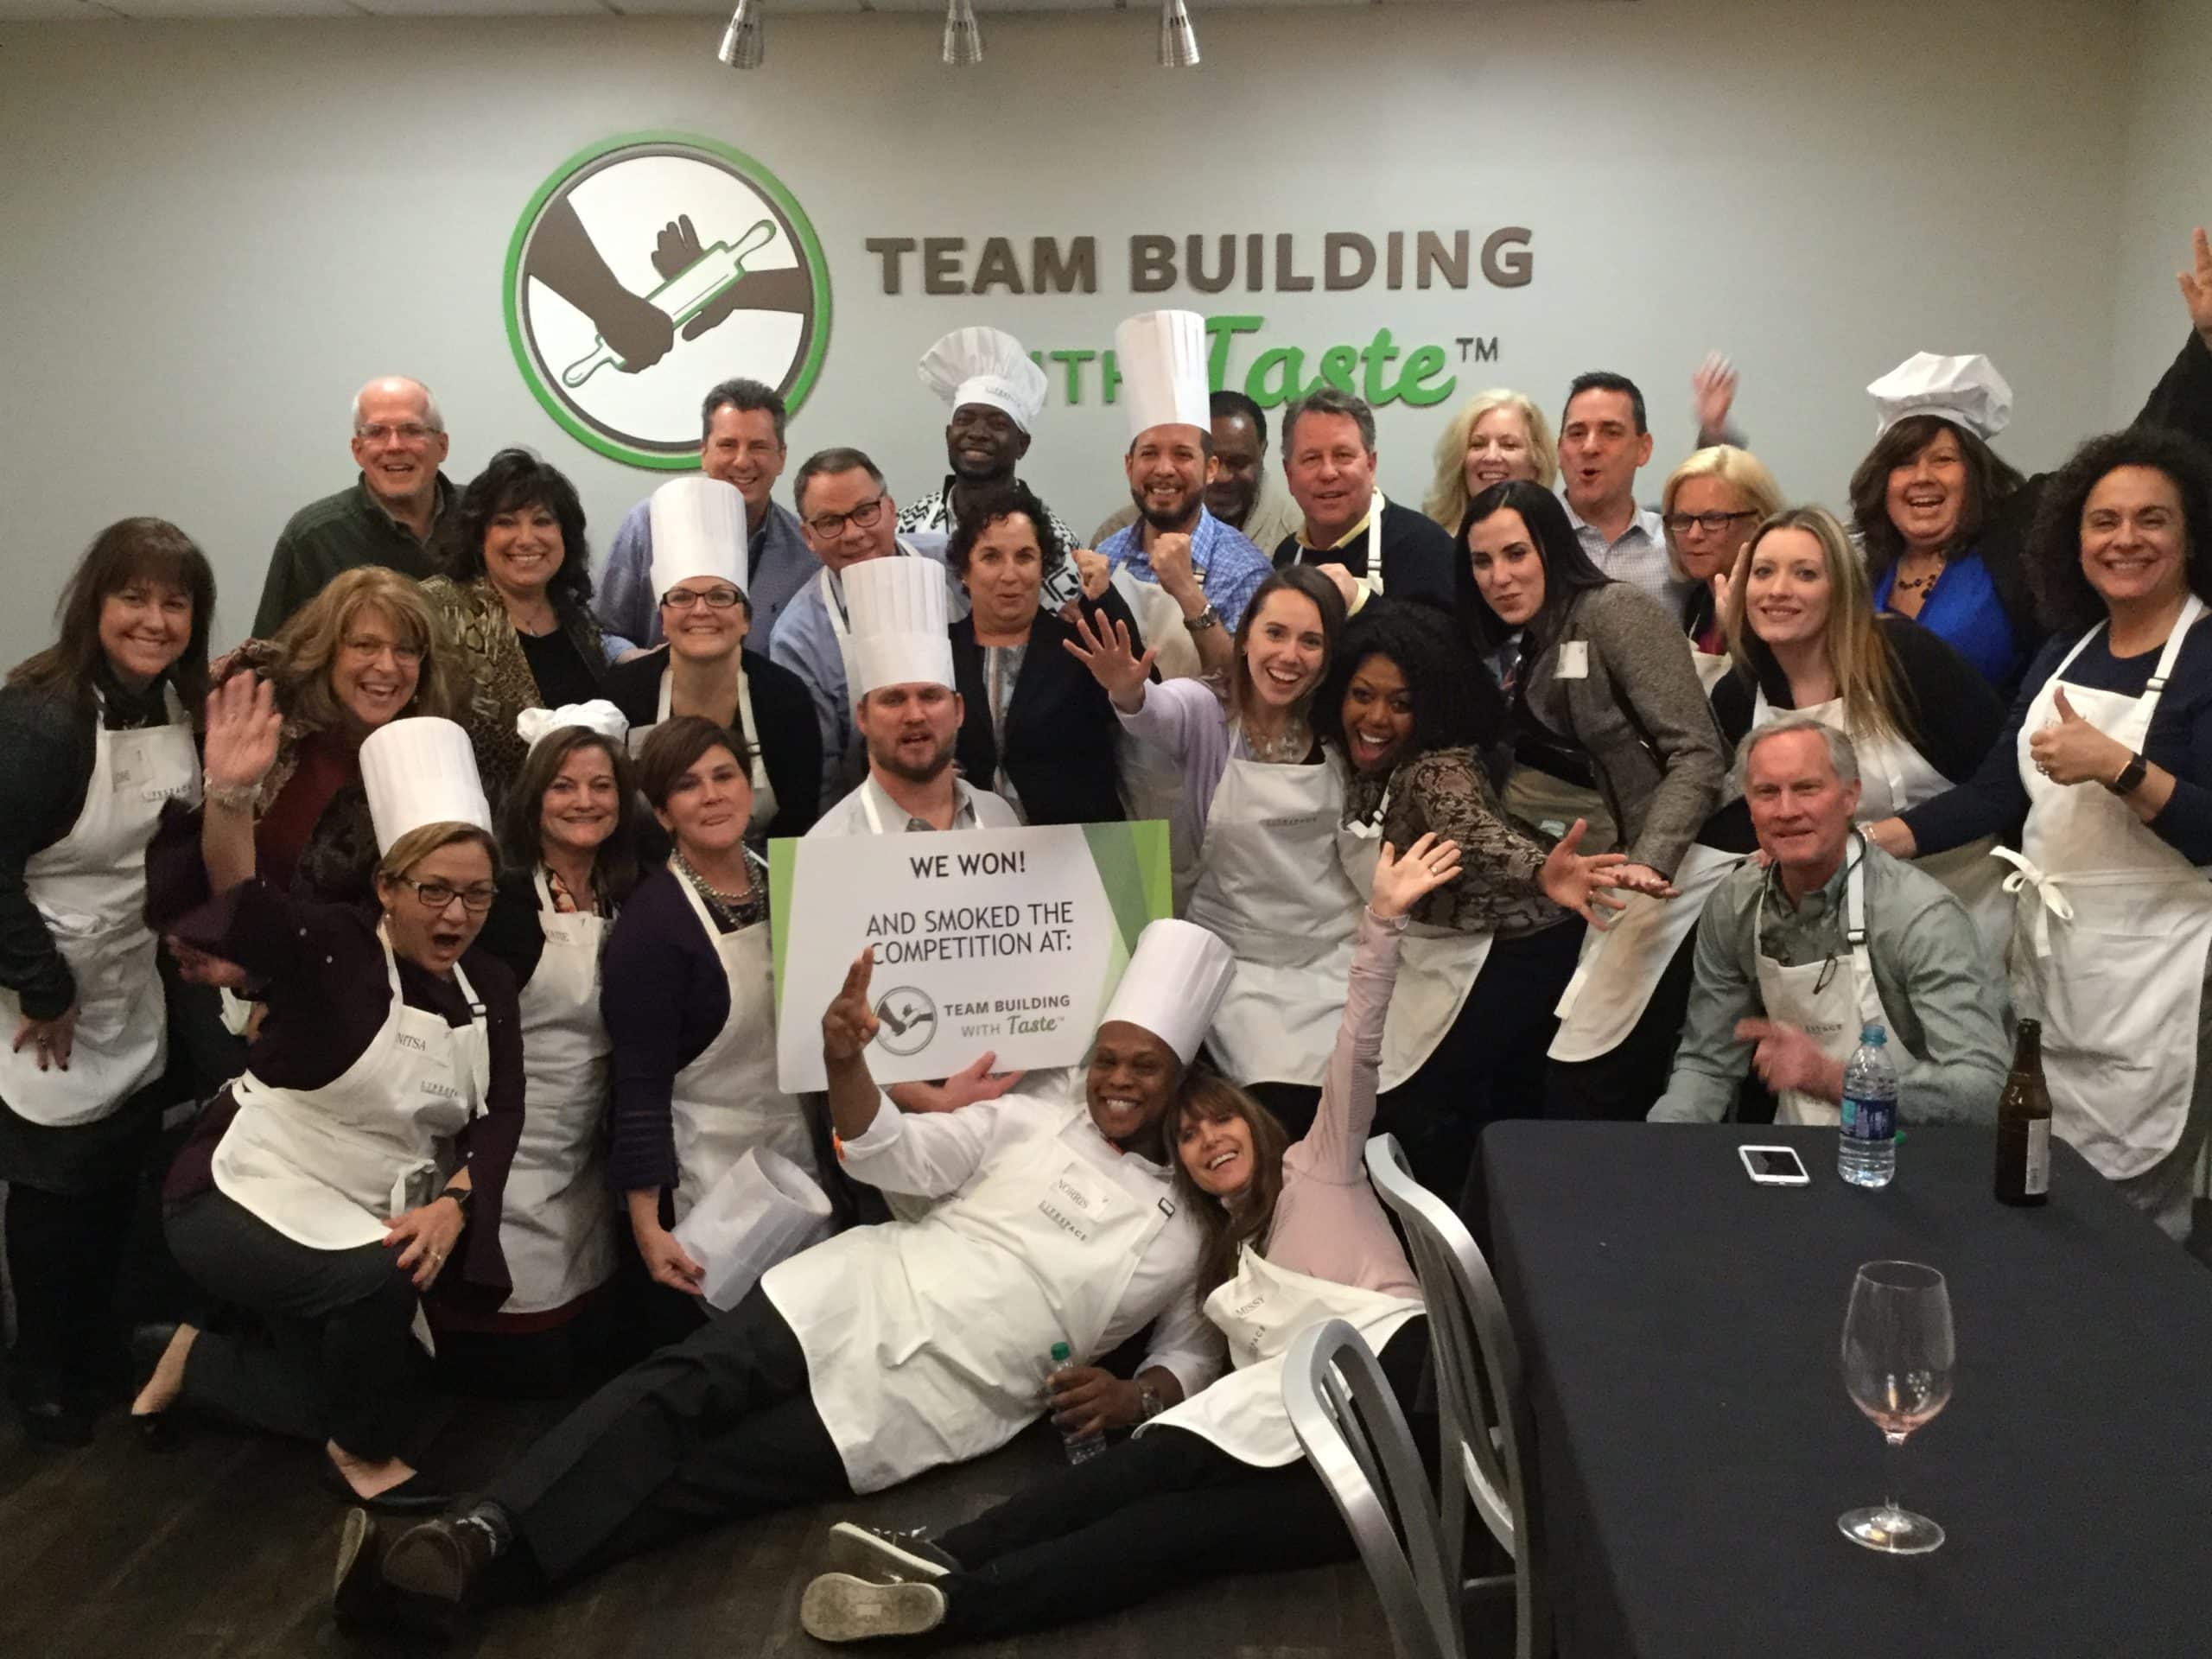 Teams like the Lifespace Communities group love our culinary team building events.